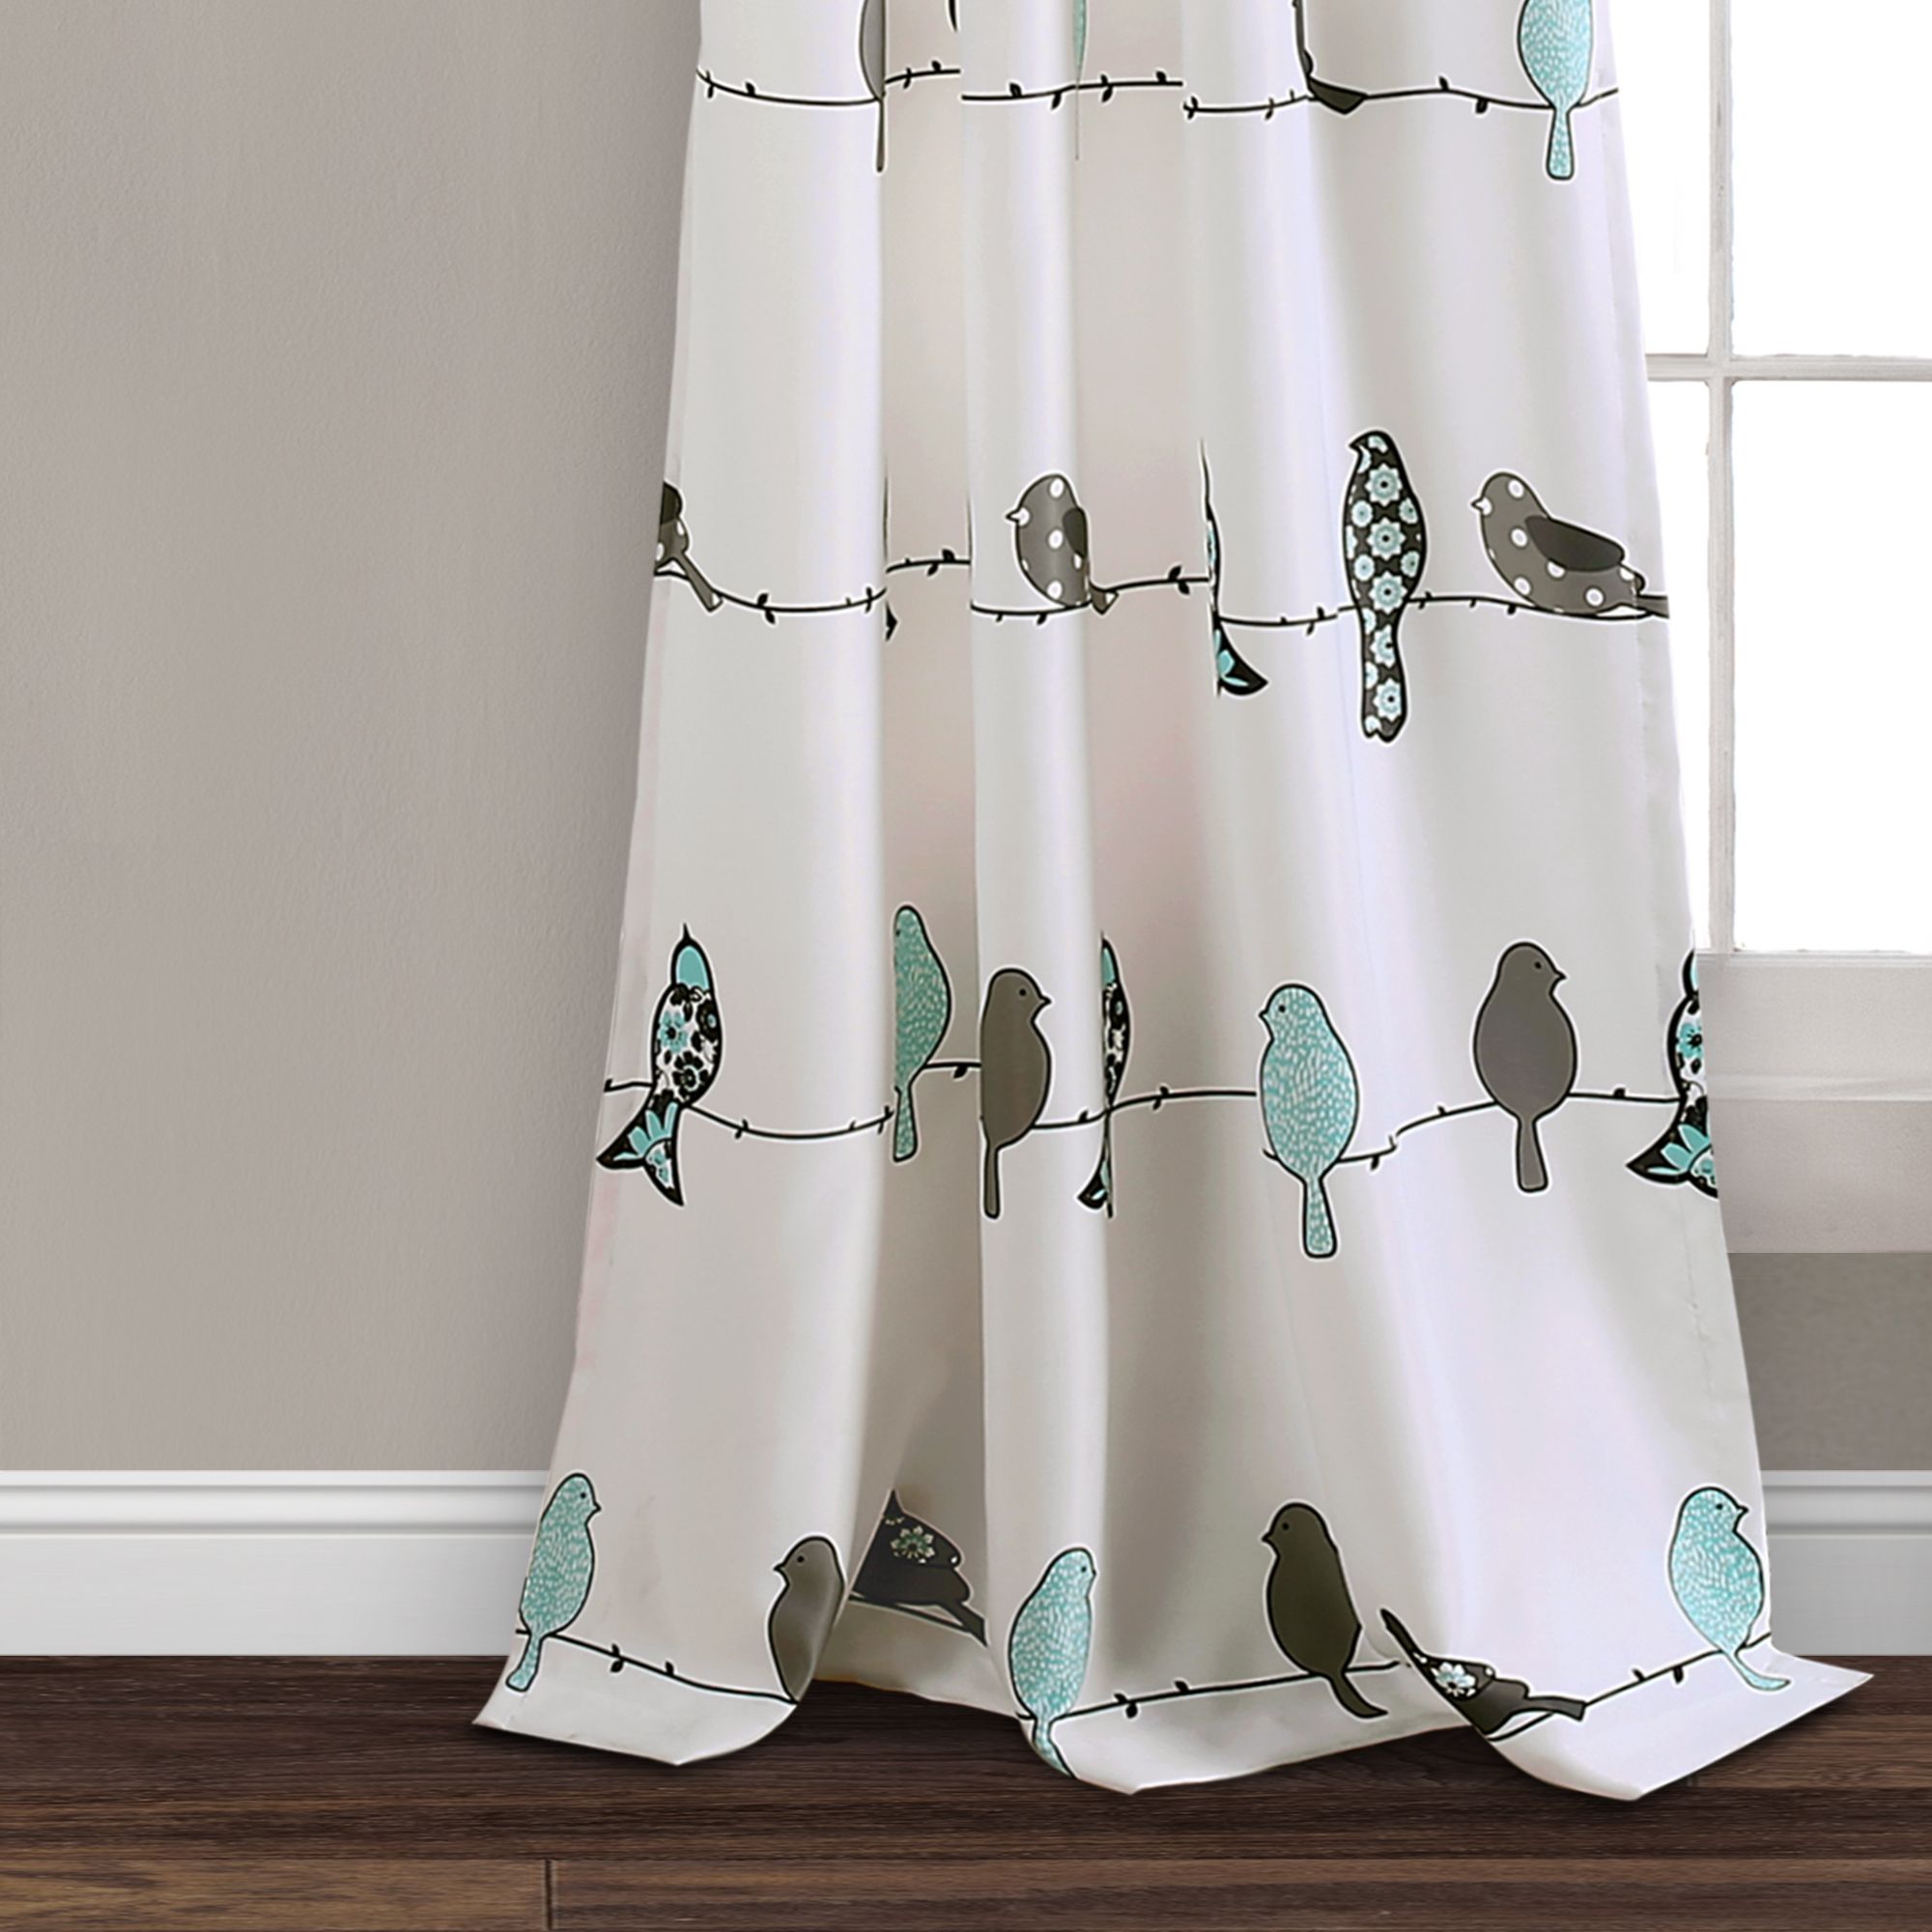 Details About Rowley Birds Room Darkening Window Curtain Panels Blush/gray  Set 52x84+2 Intended For Rowley Birds Valances (View 10 of 20)